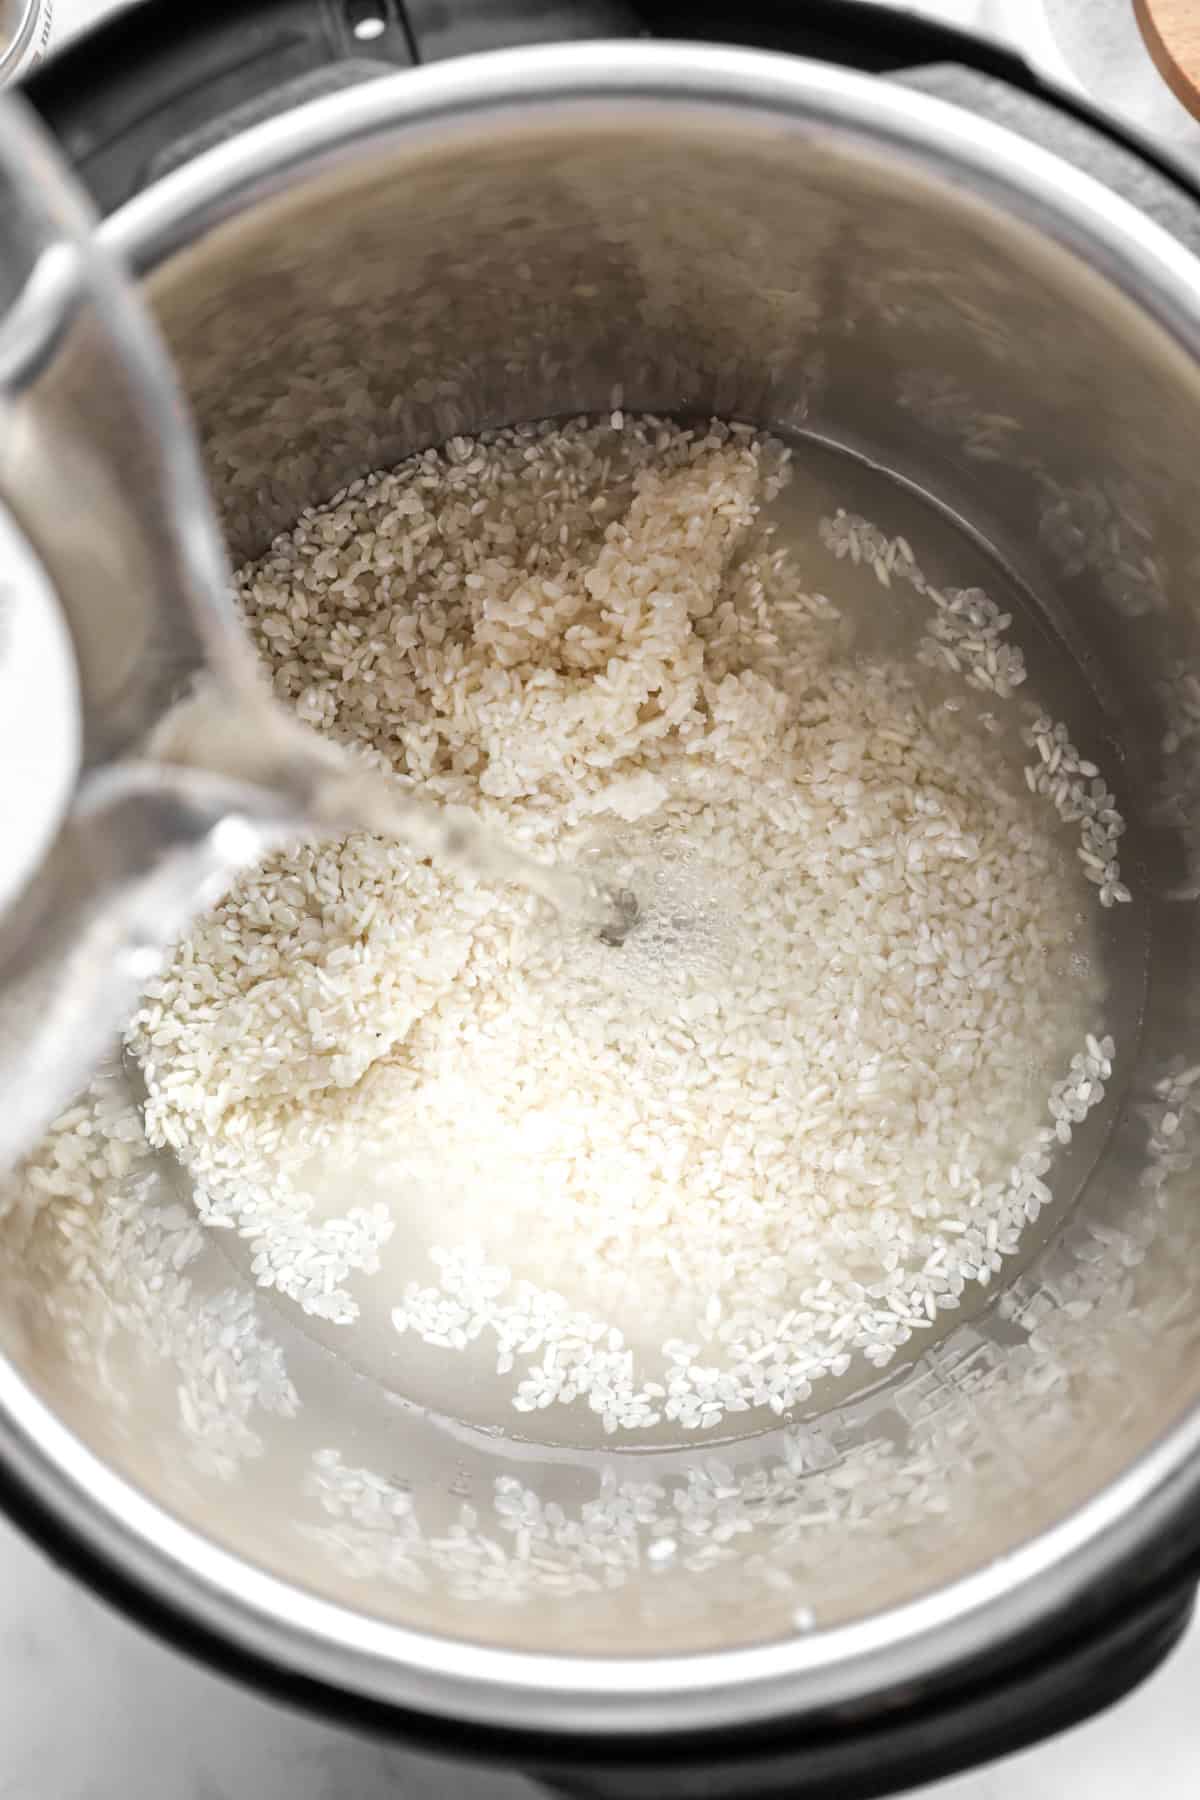 Pour water over rice in Instant Pot.